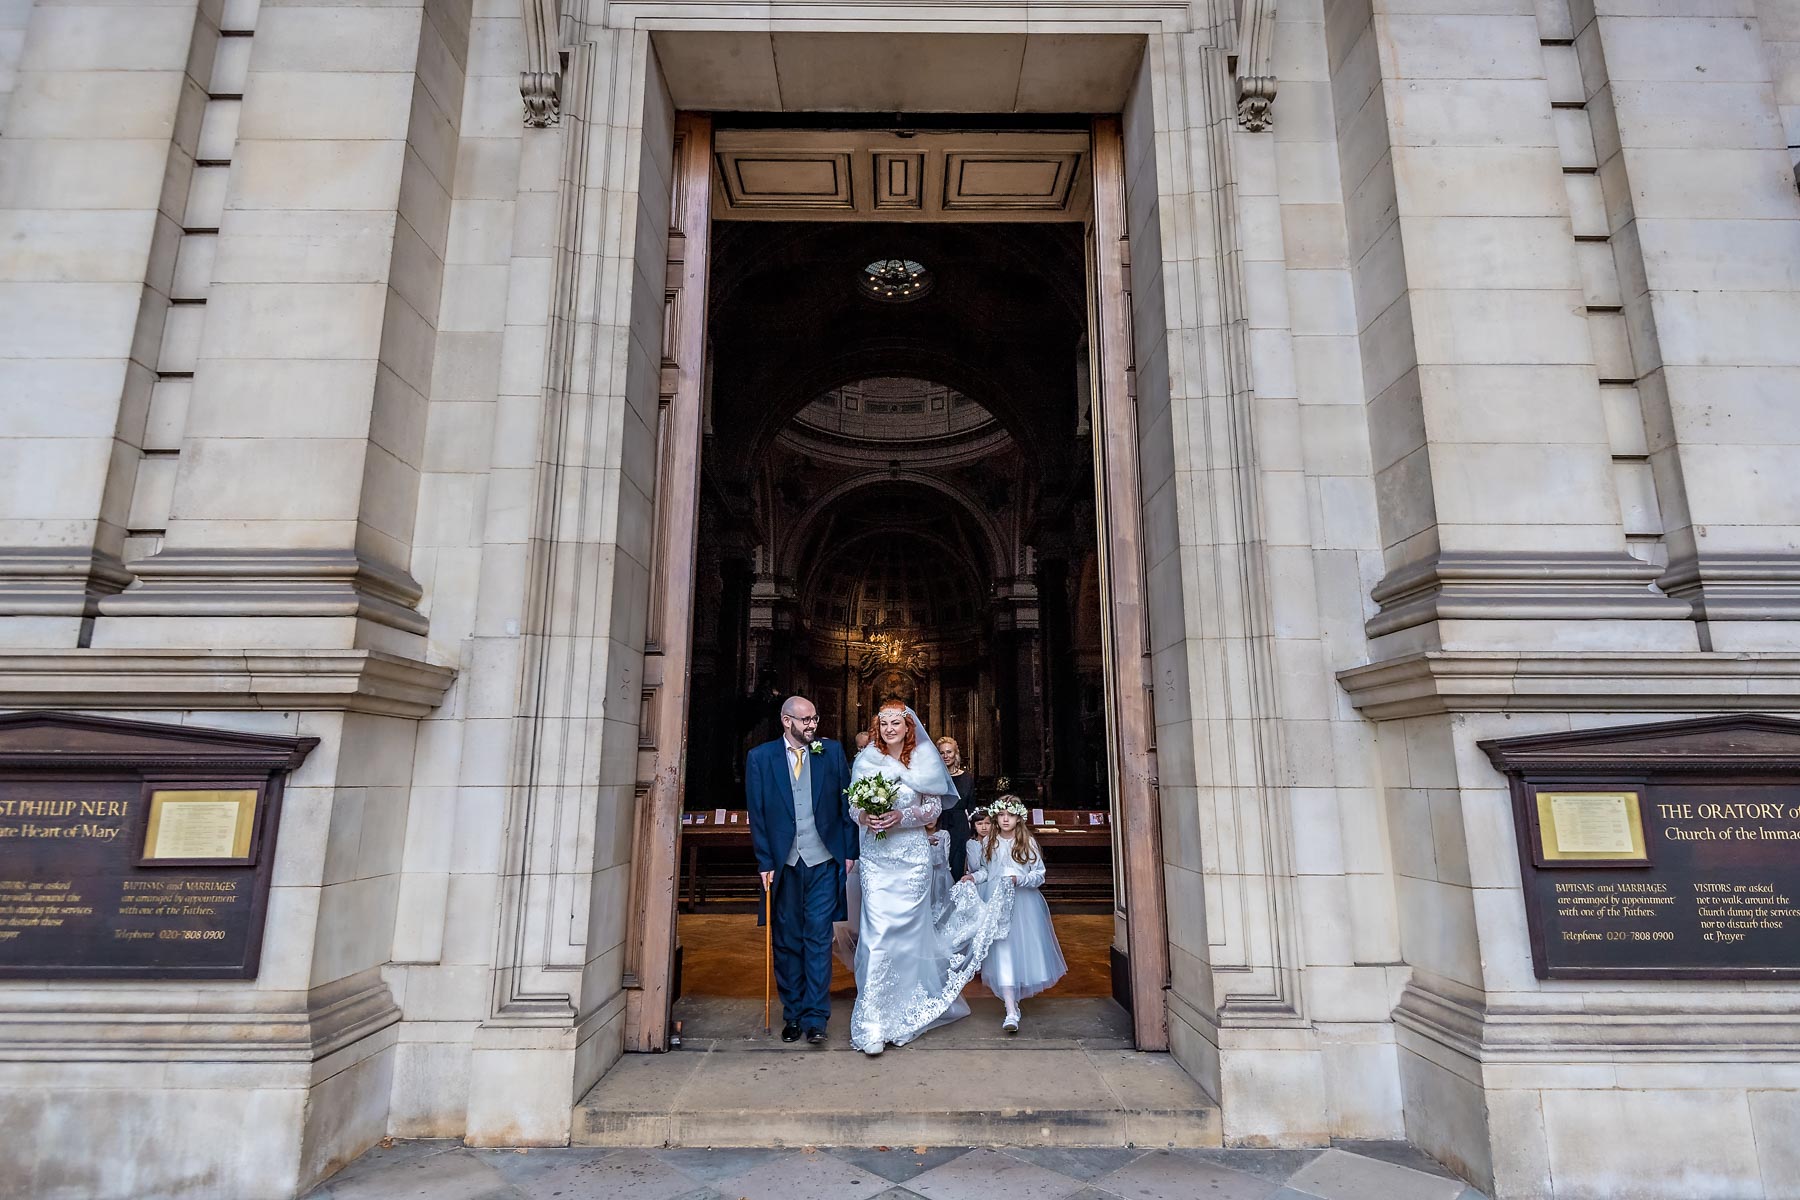 The couple and their bridesmaids exit Brompton Oratory in Knightsbridge, London